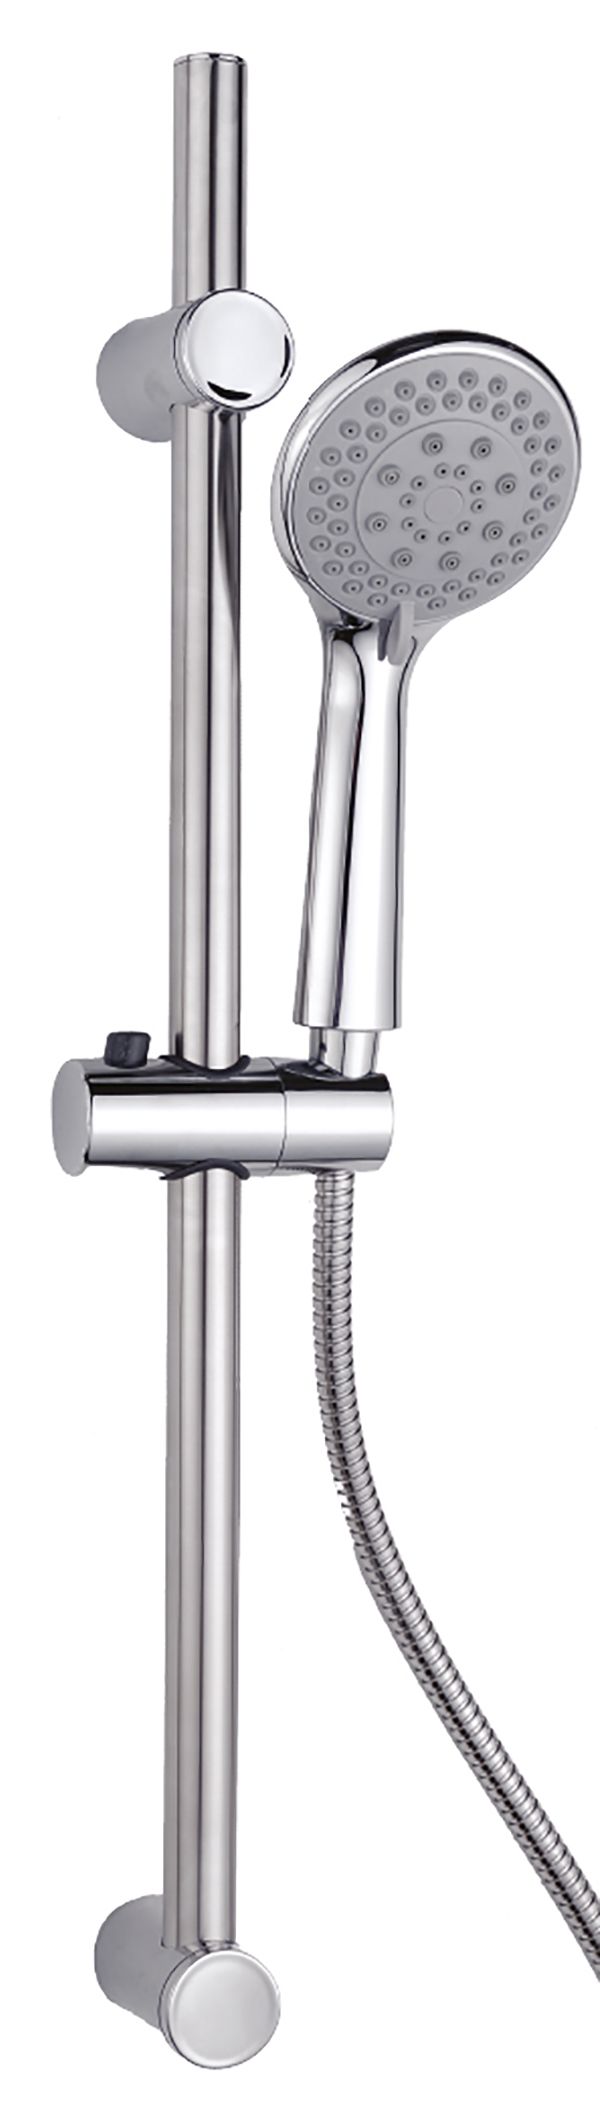 Wickes 3 Function Shower Set - Chrome